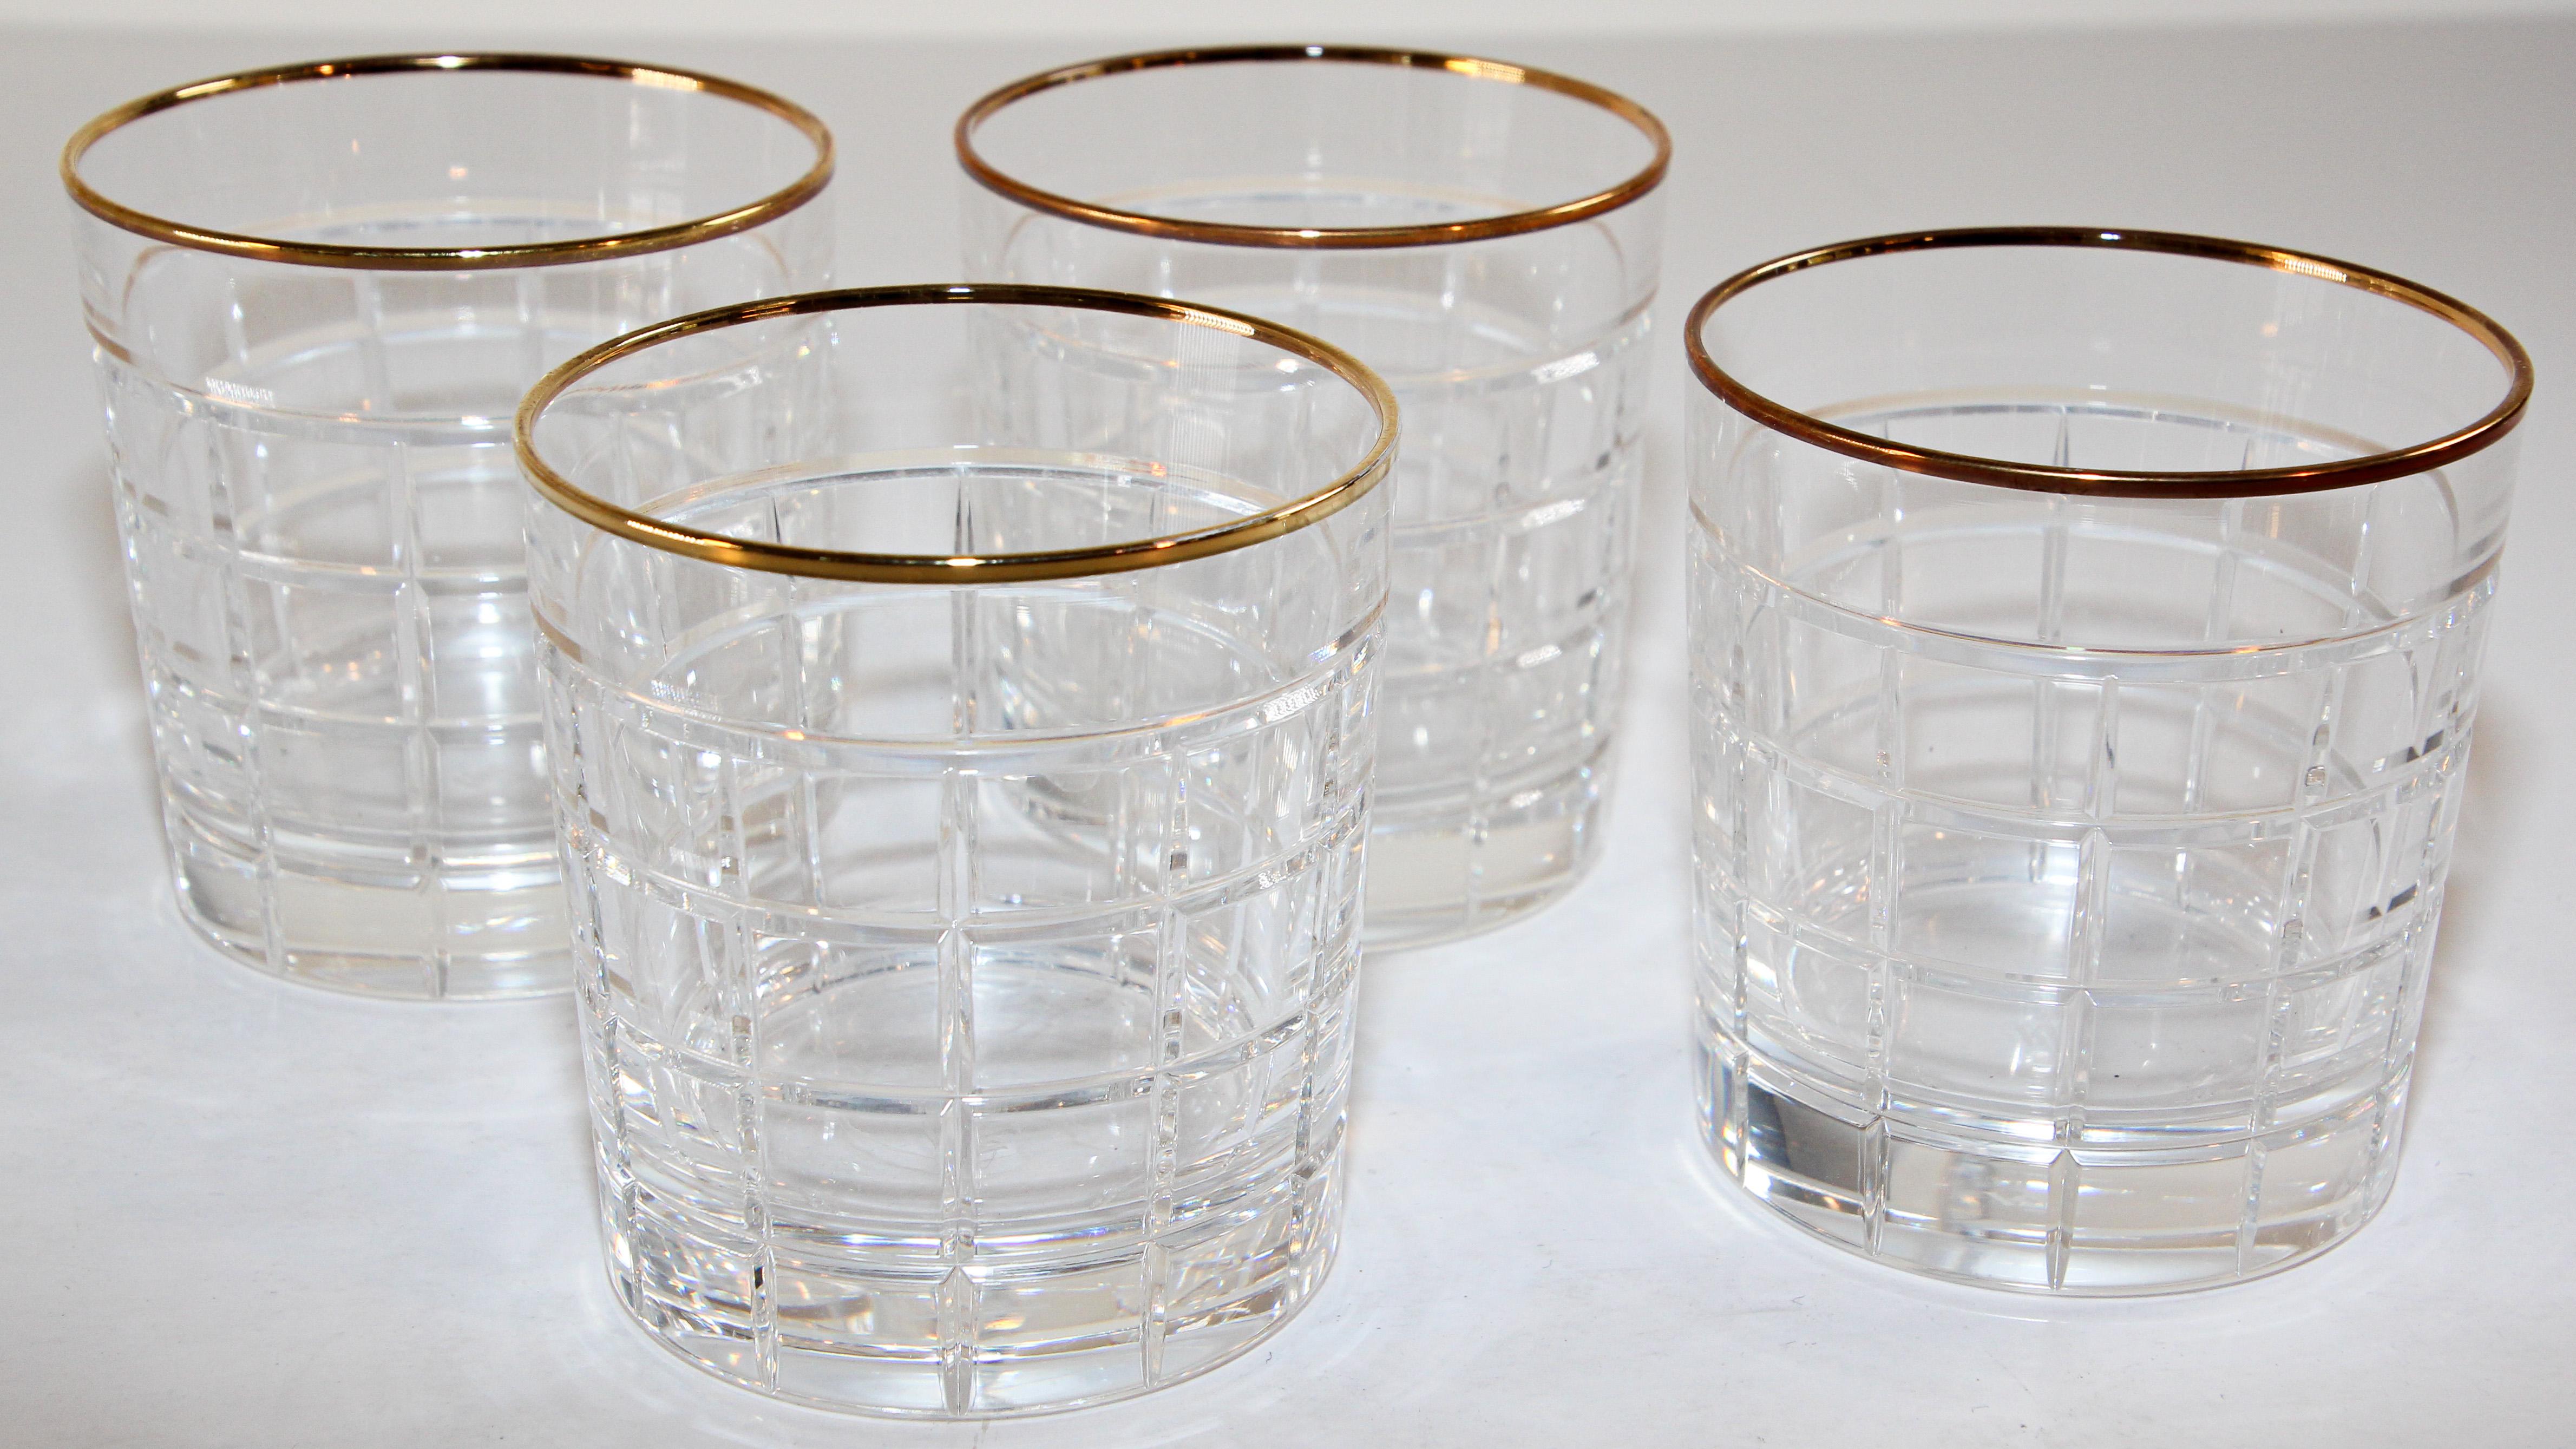 Set of four cut clear crystal rocks' double old-fashioned cocktail whiskey glasses by Ralph Lauren.
Set of 4 vintage rock whiskey or water barware, drinking glasses in beautiful clear cut crystal glass with gold rim.
Unique elegant barware